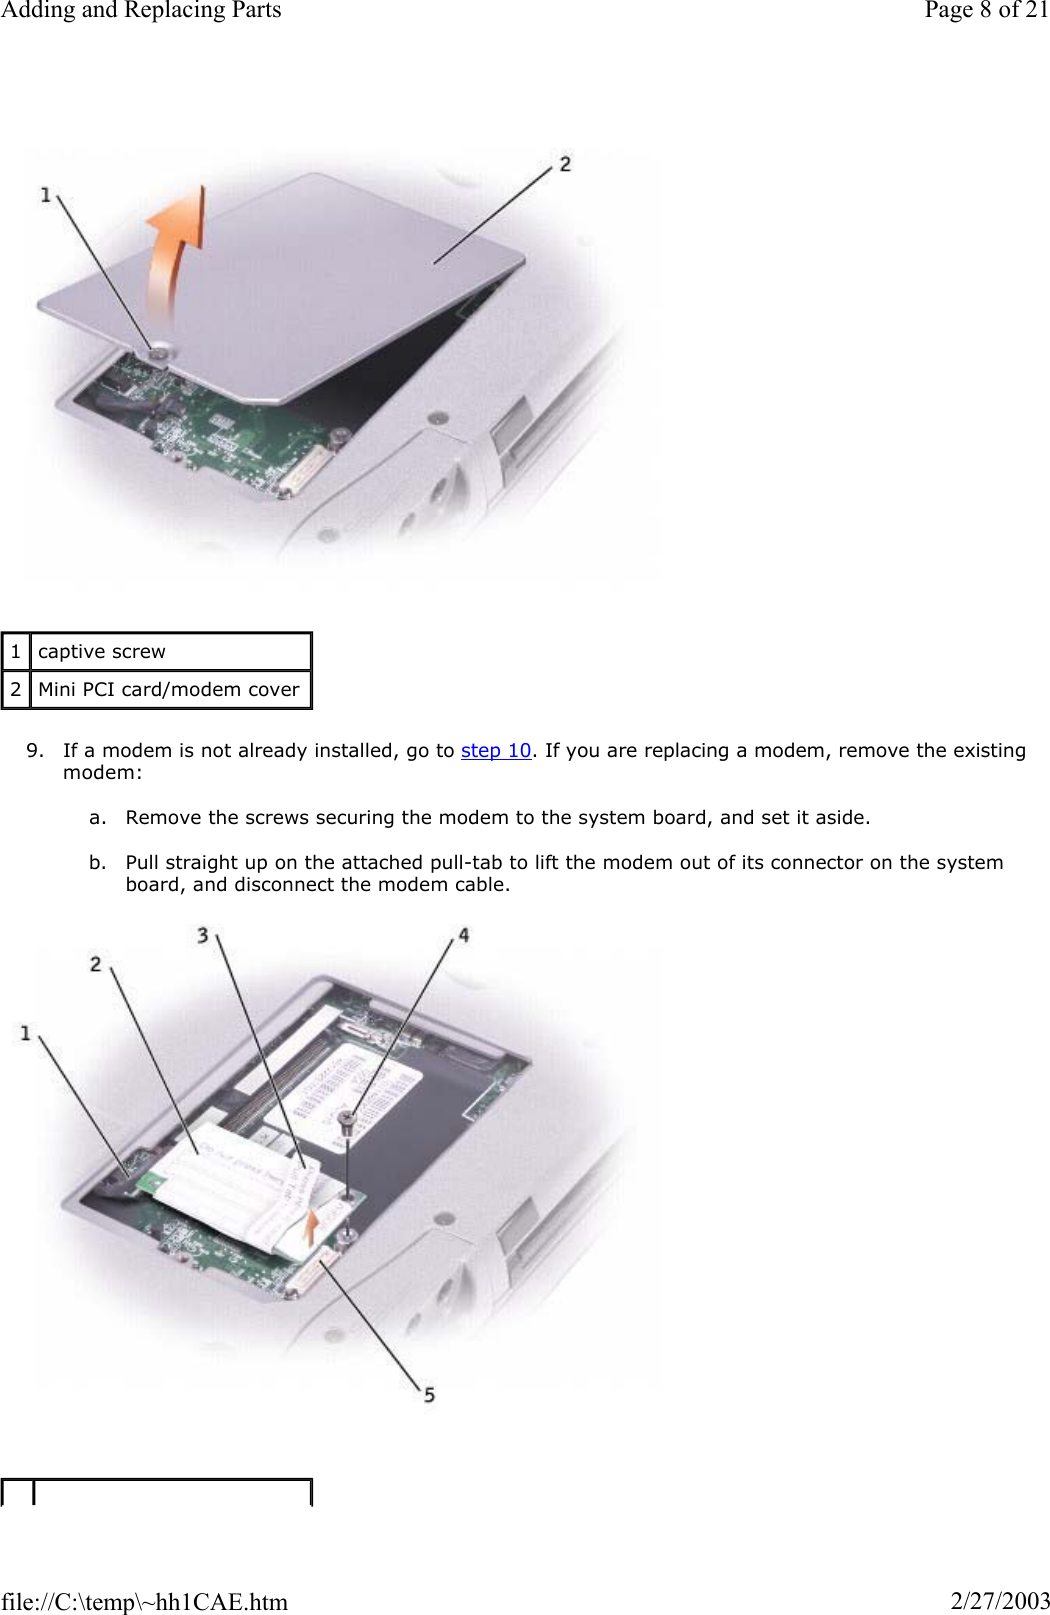 9. If a modem is not already installed, go to step 10. If you are replacing a modem, remove the existing modem: a. Remove the screws securing the modem to the system board, and set it aside.  b. Pull straight up on the attached pull-tab to lift the modem out of its connector on the system board, and disconnect the modem cable. 1captive screw 2Mini PCI card/modem cover Page 8 of 21Adding and Replacing Parts2/27/2003file://C:\temp\~hh1CAE.htm